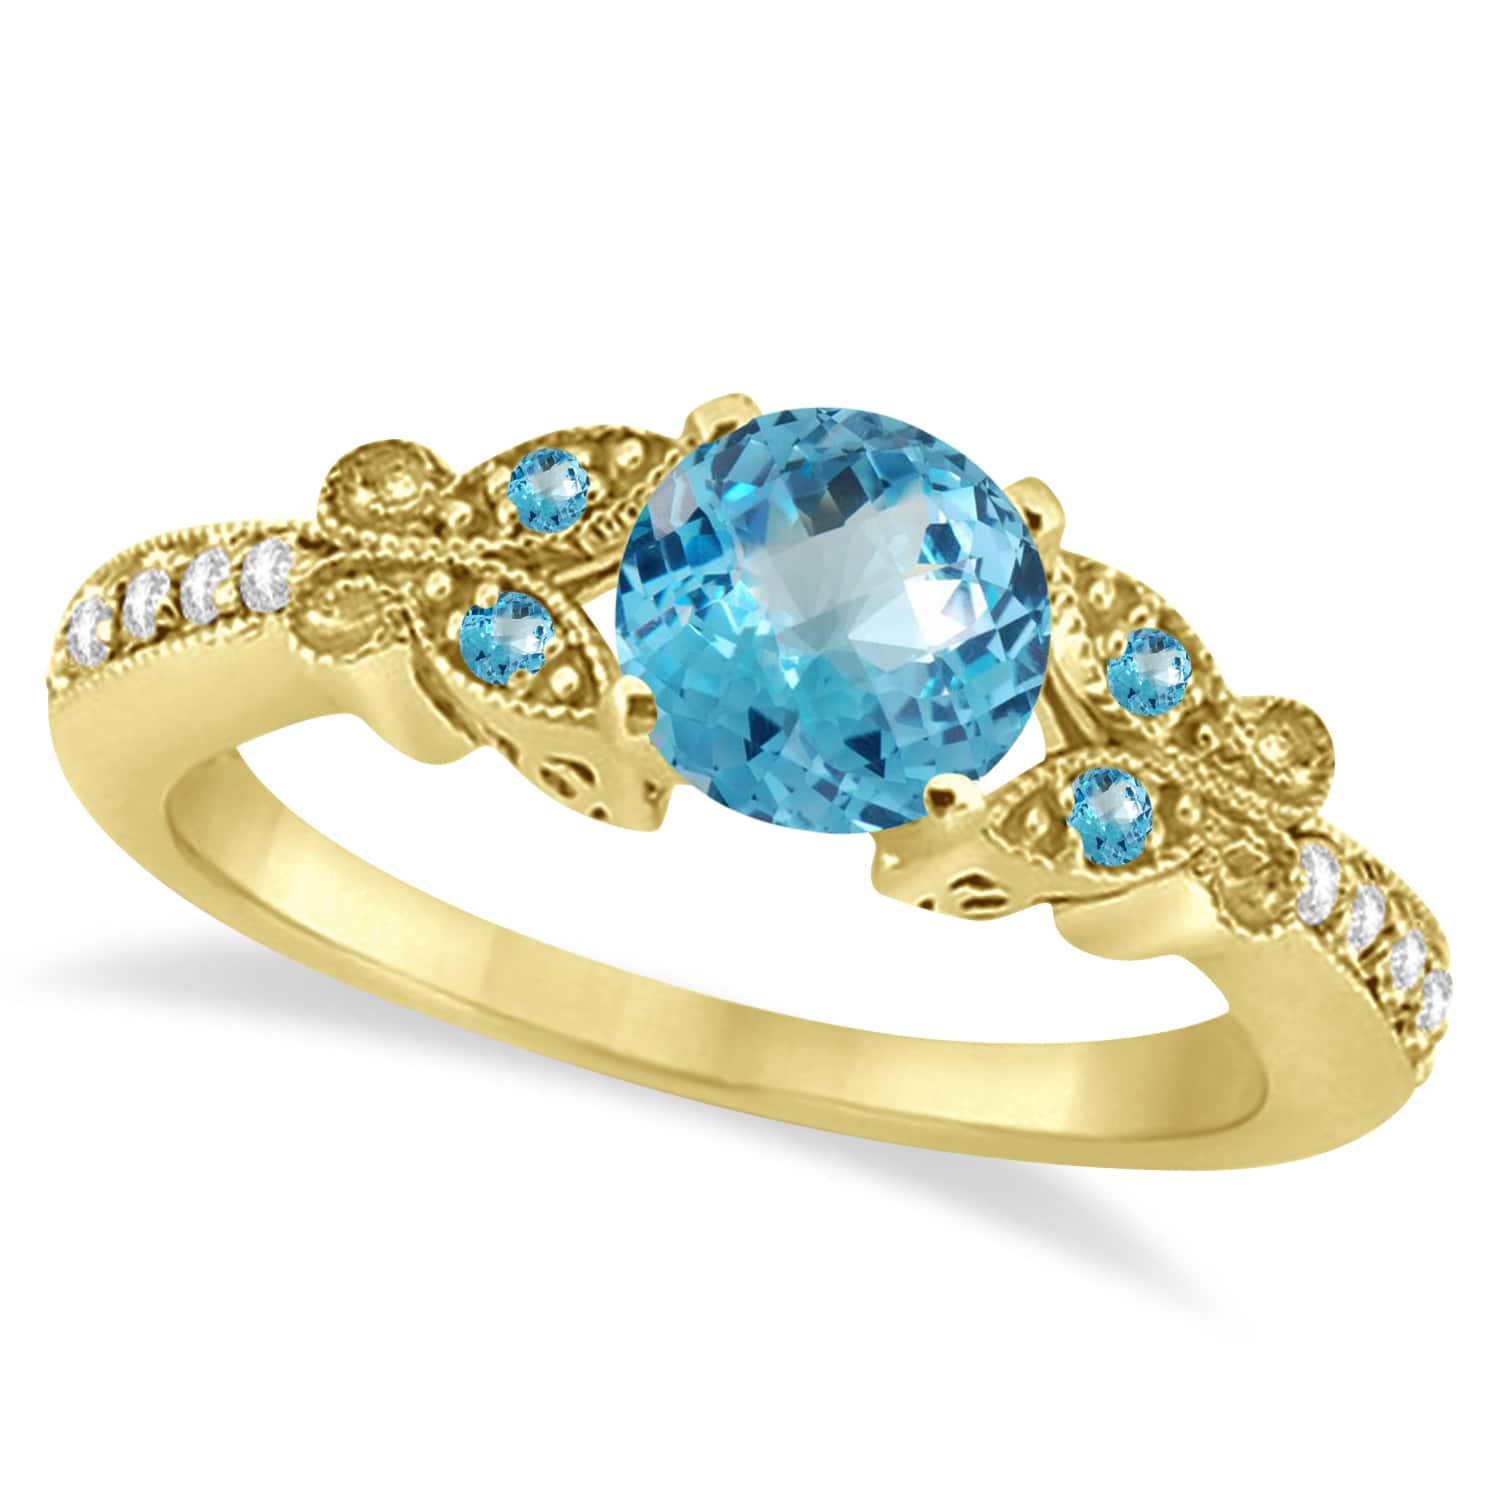 Butterfly Blue Topaz & Diamond Engagement Ring 18K Yellow Gold (1.78ct)